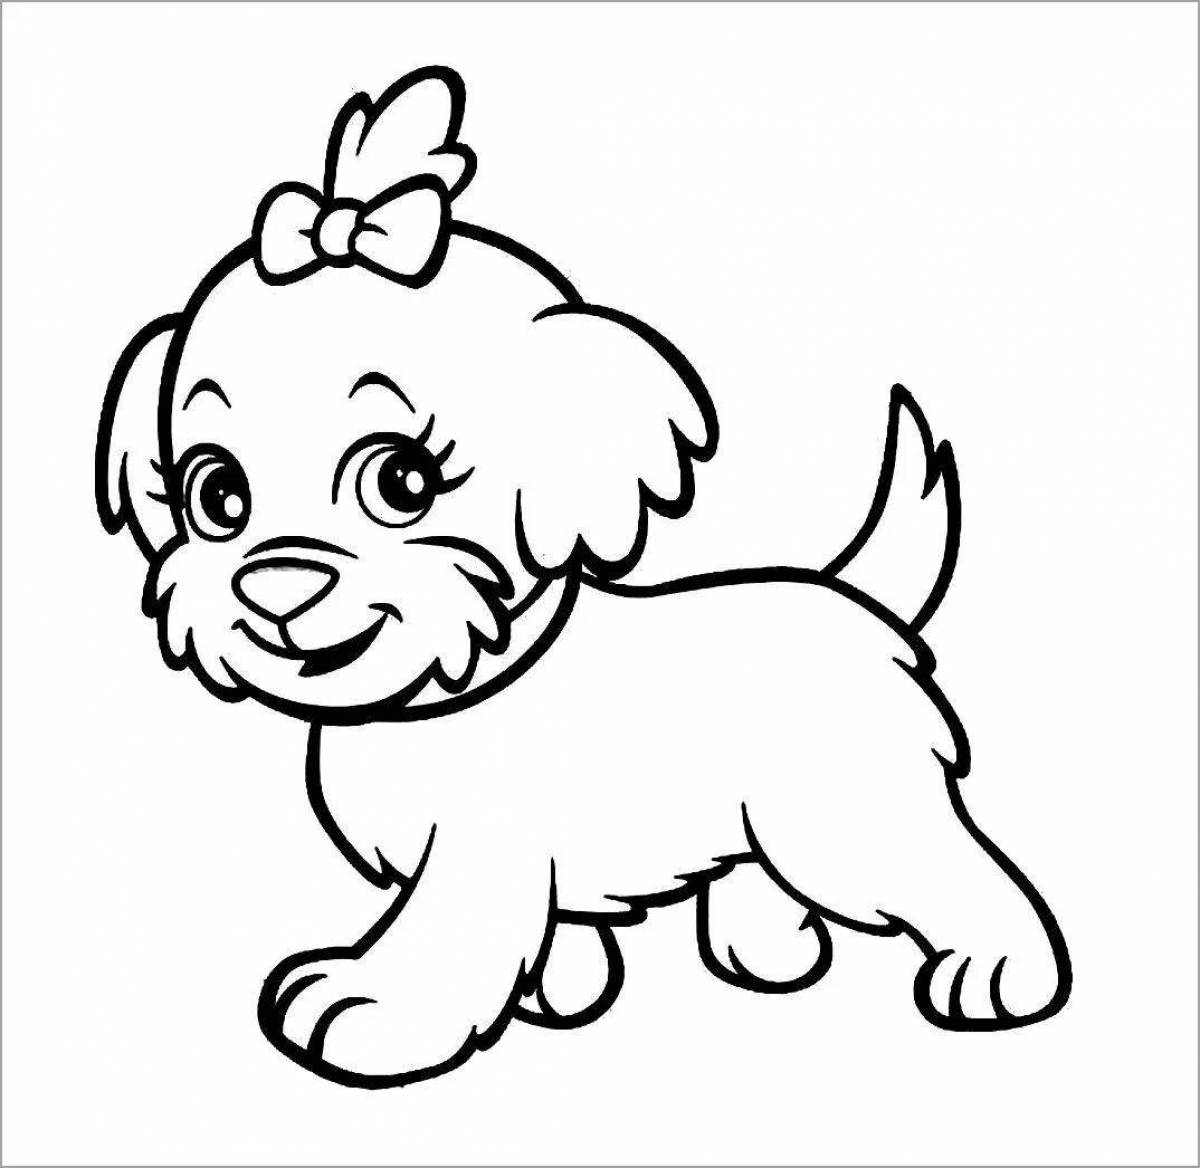 Adorable puppy coloring book for kids